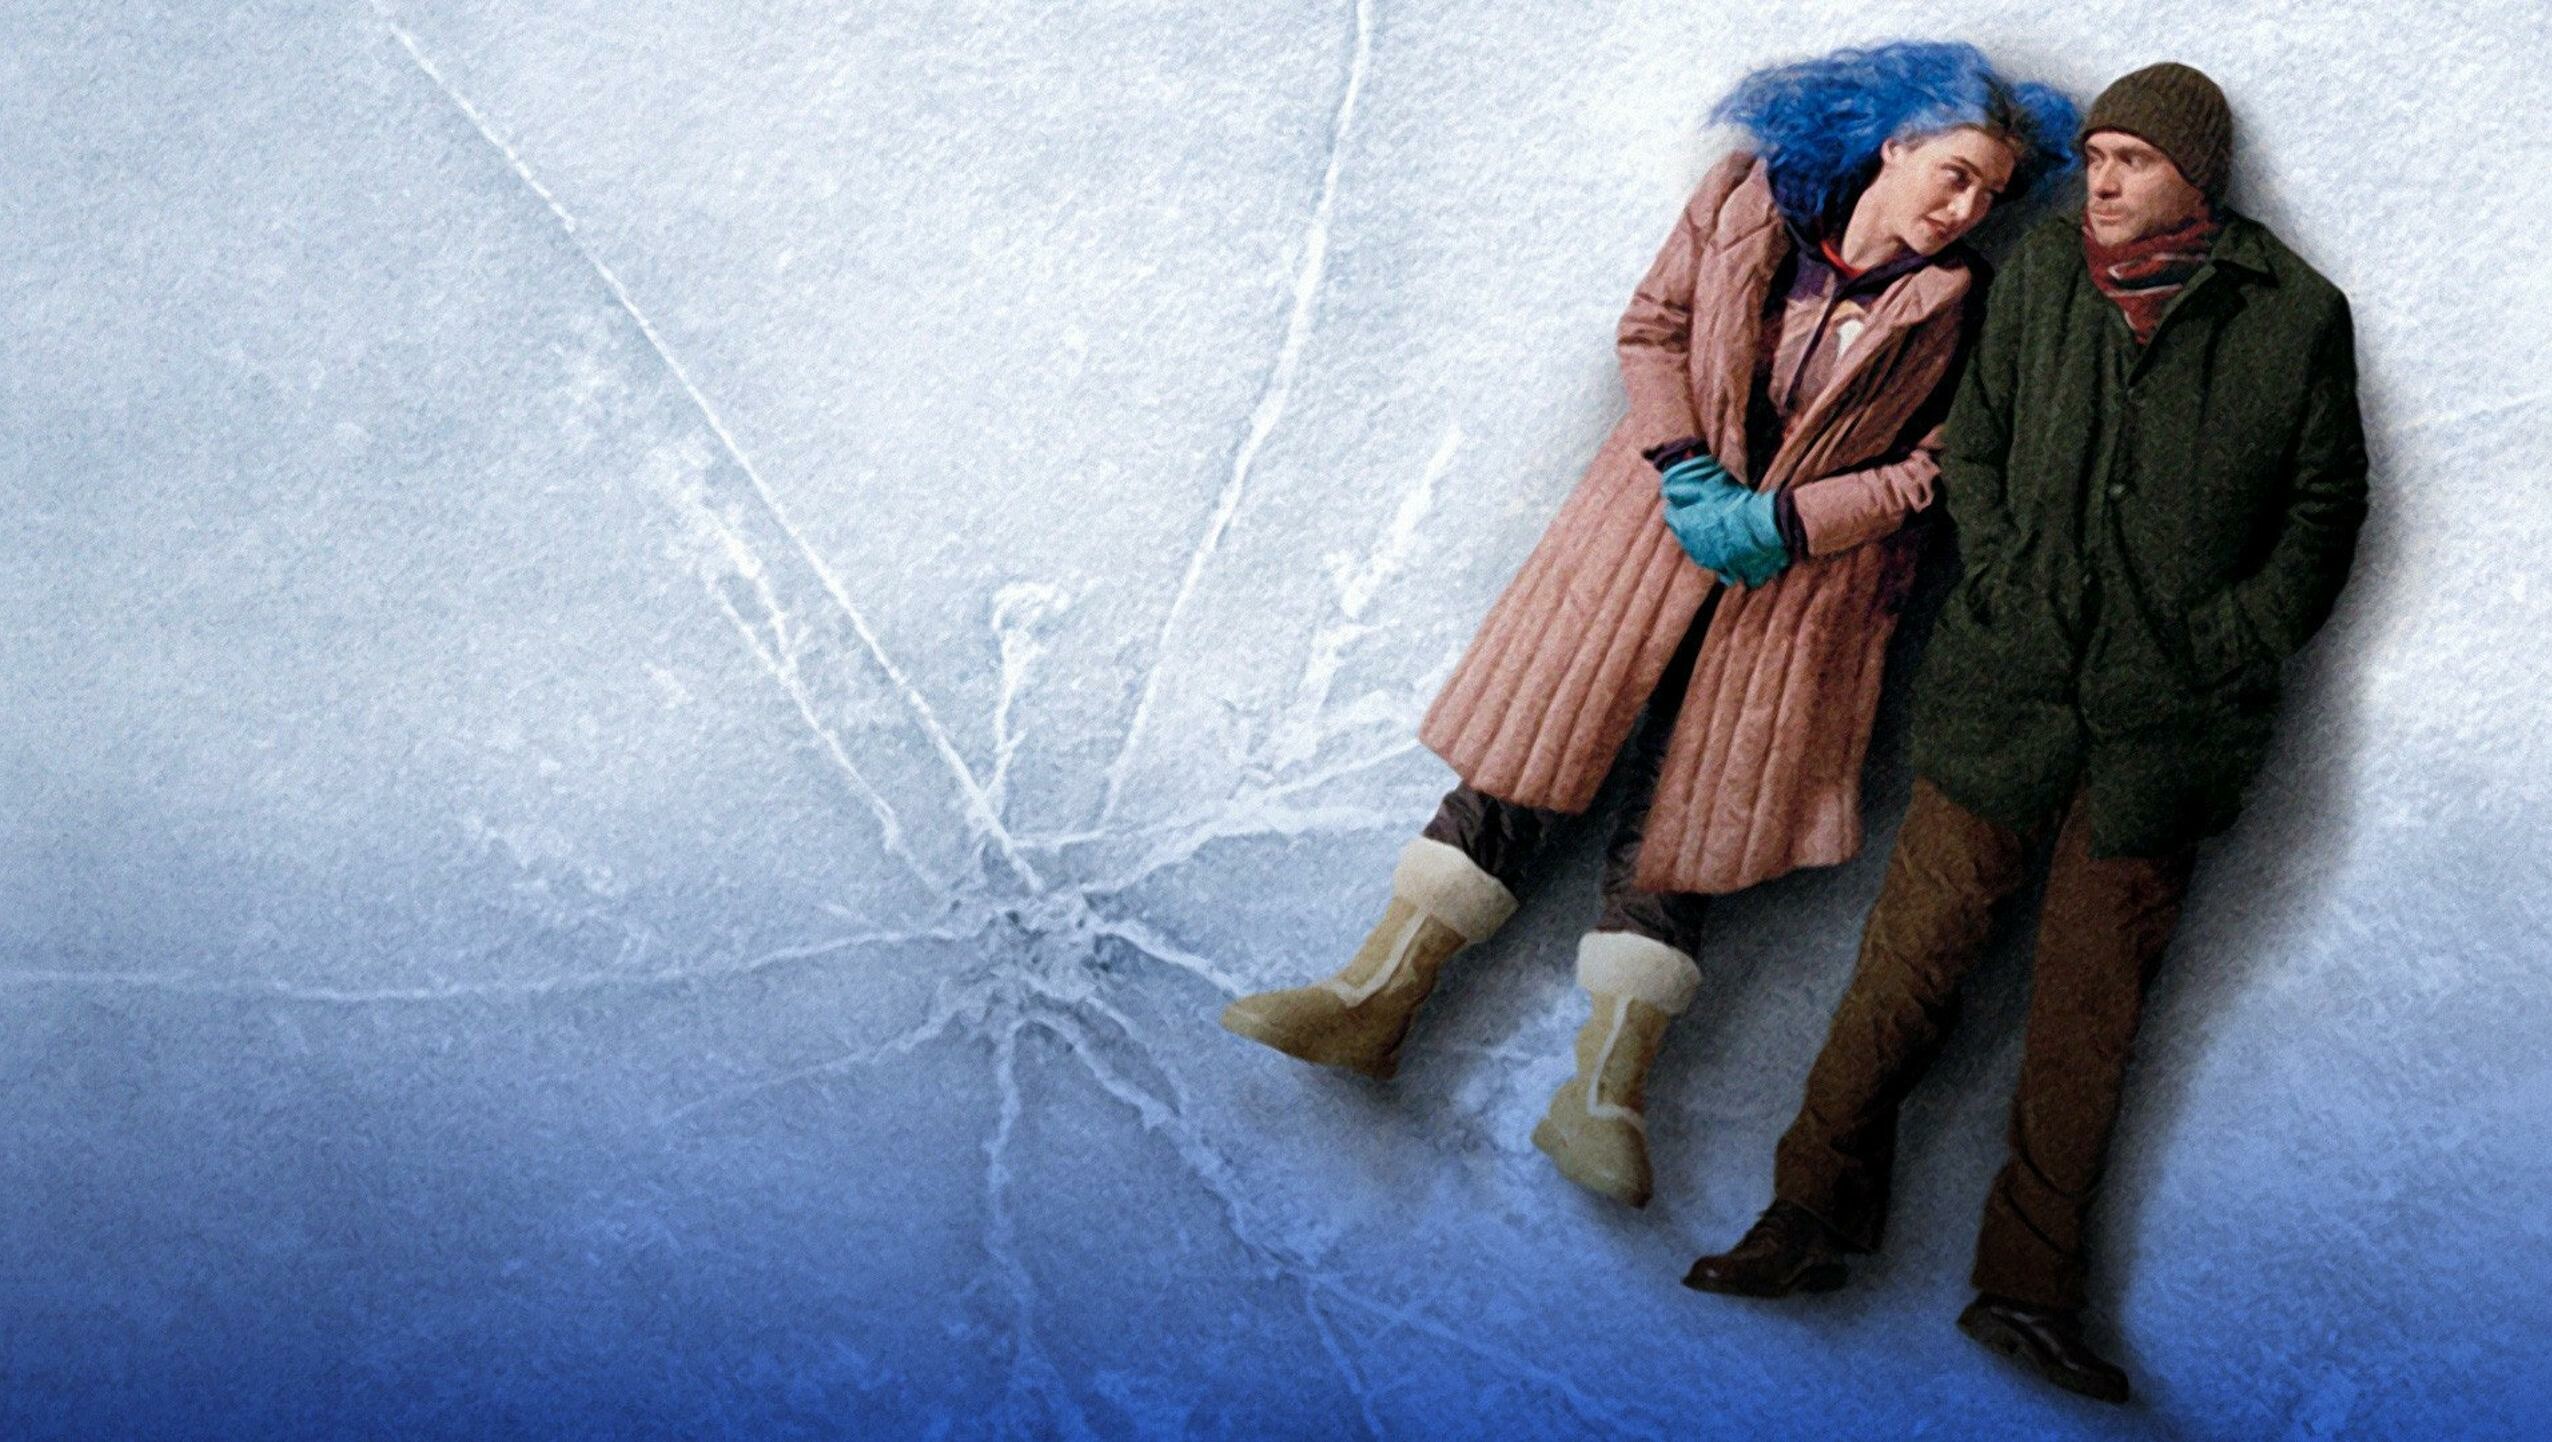 Eternal Sunshine of the Spotless Mind: Written by Charlie Kaufman and directed by Michel Gondry. 2560x1450 HD Background.